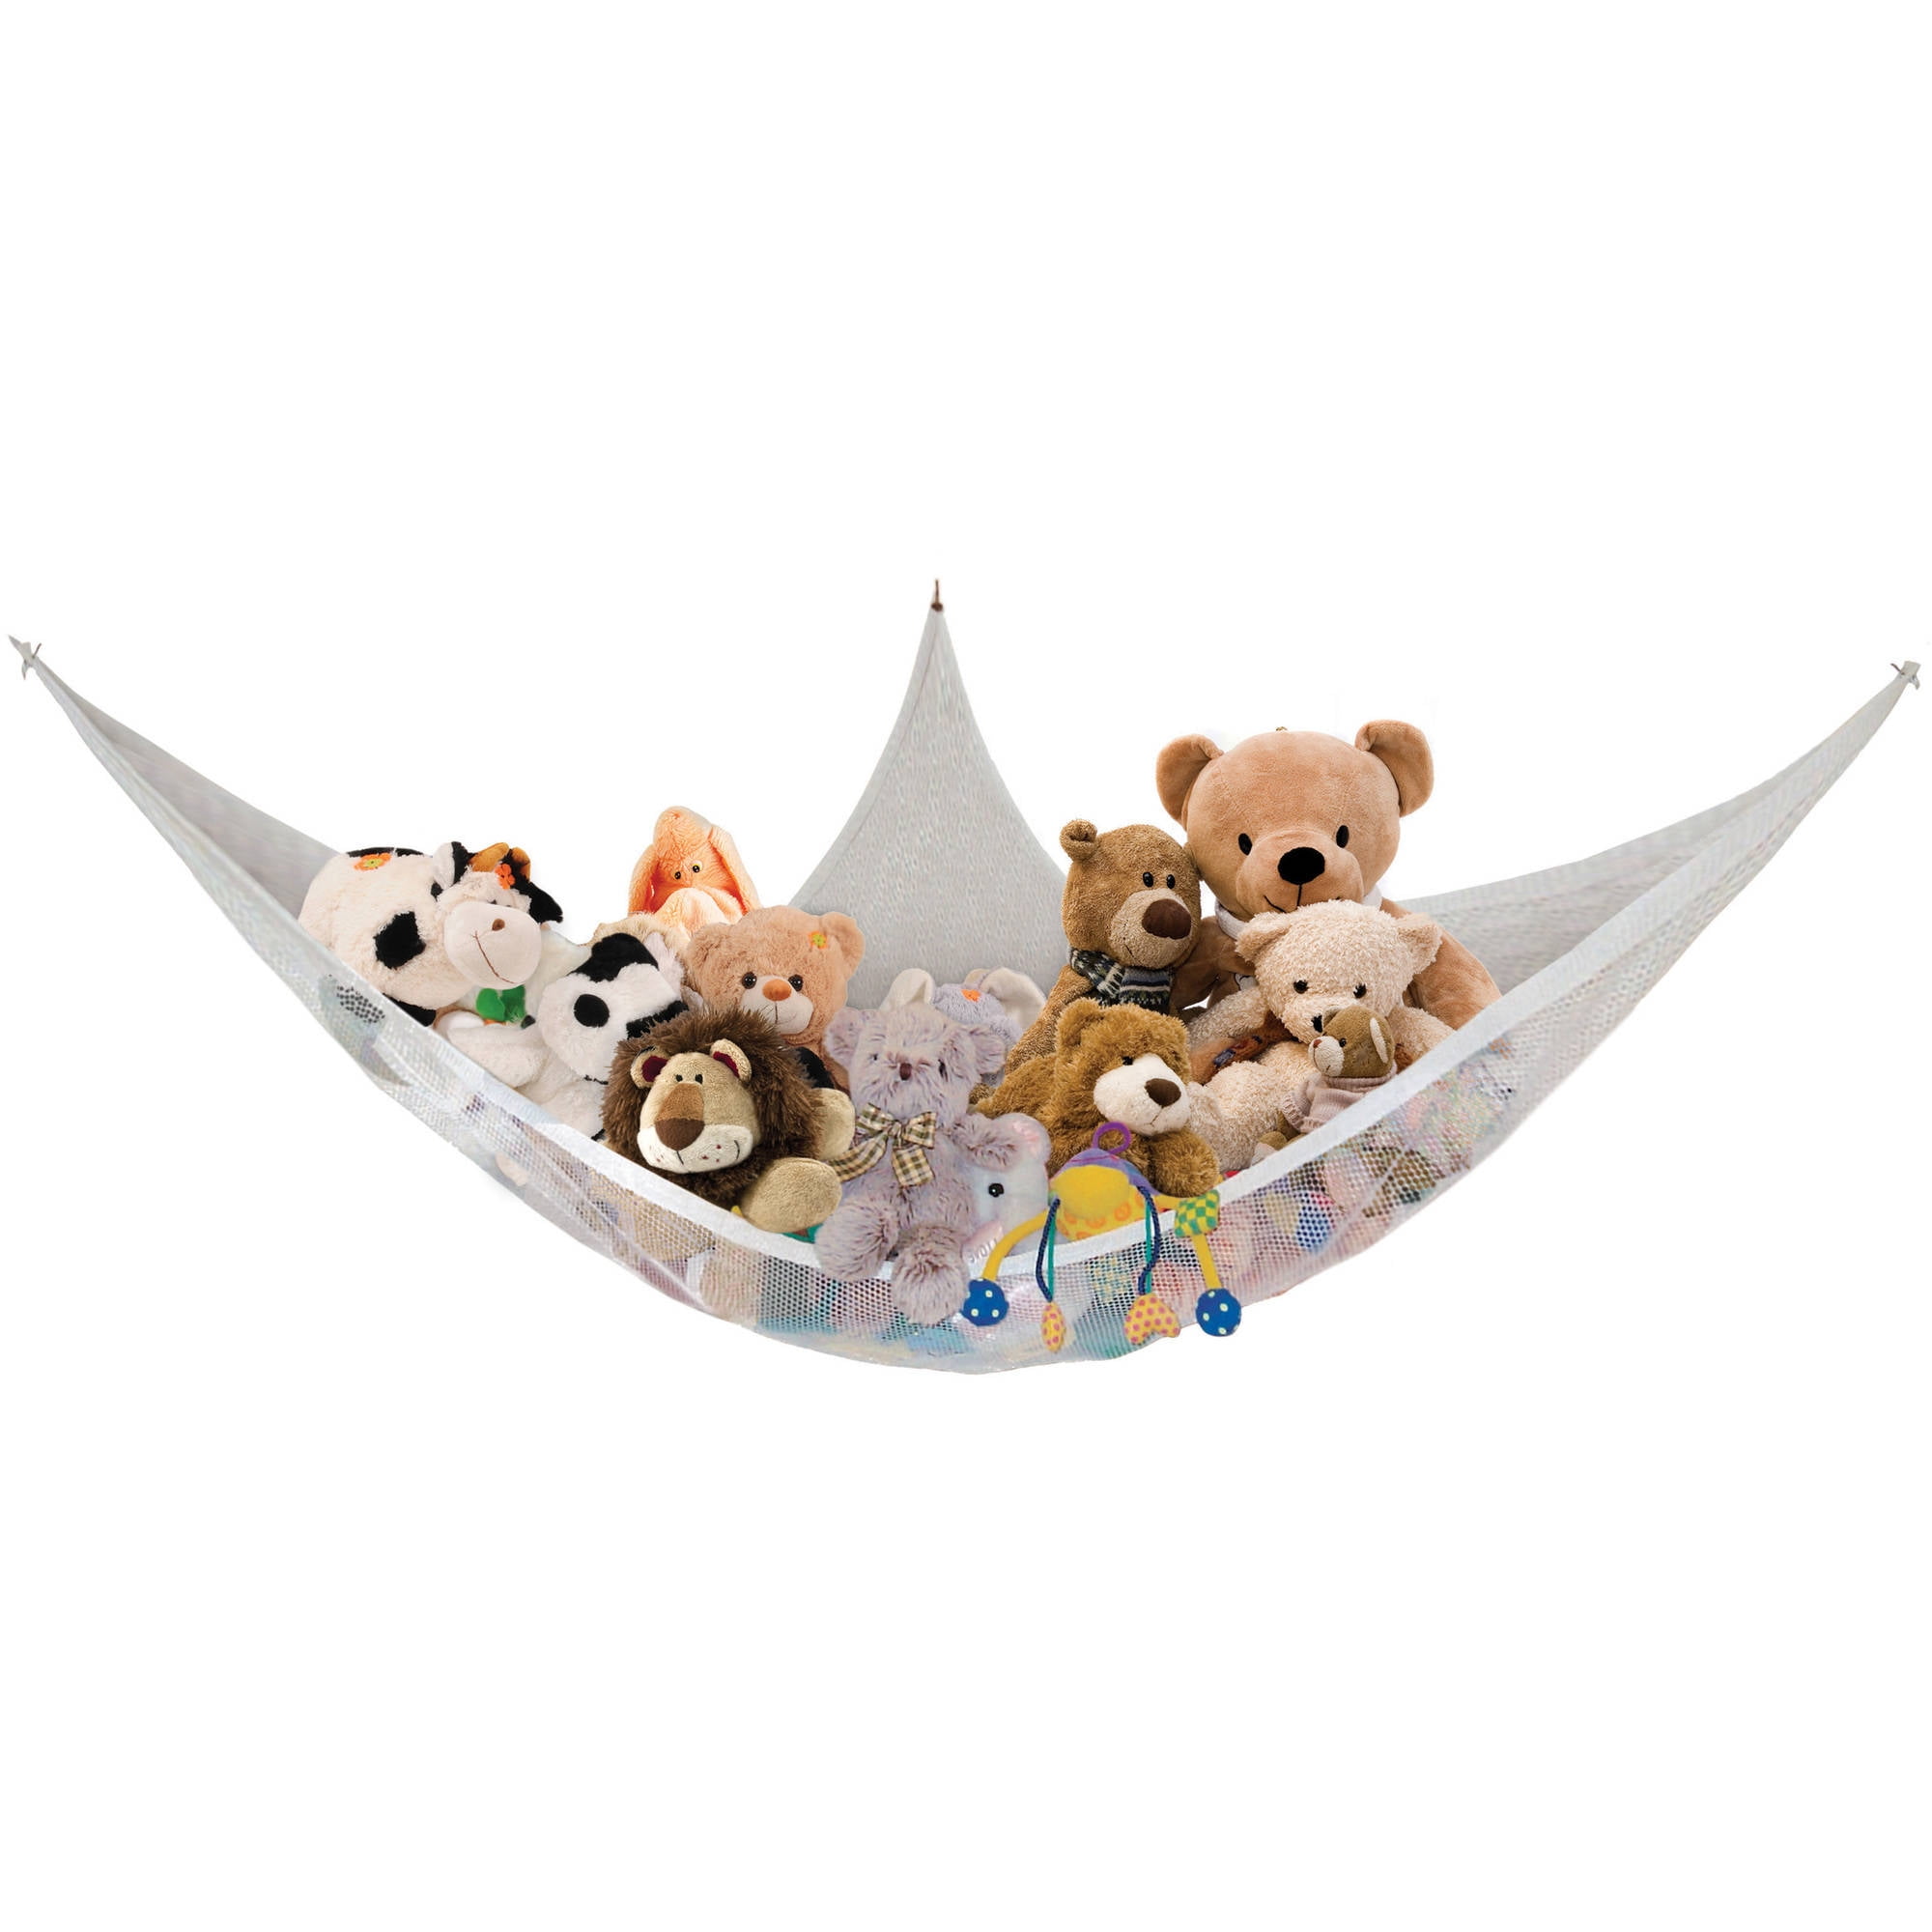 Top Quality Hammock by Kidde Time Pink Toy Storage Net for Stuffed Animals 